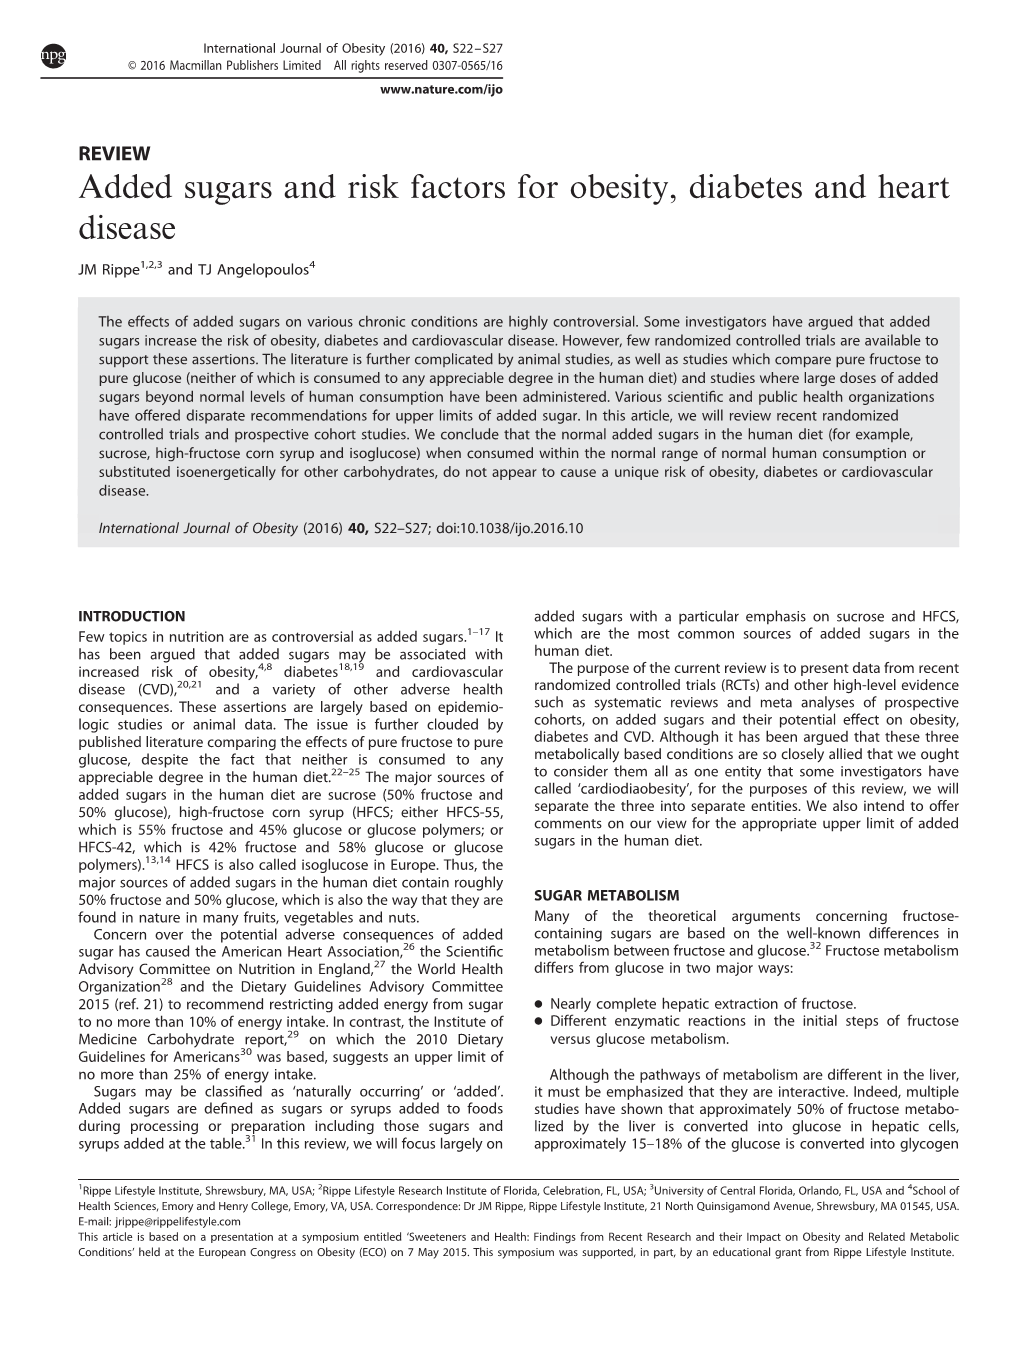 Added Sugars and Risk Factors for Obesity, Diabetes and Heart Disease